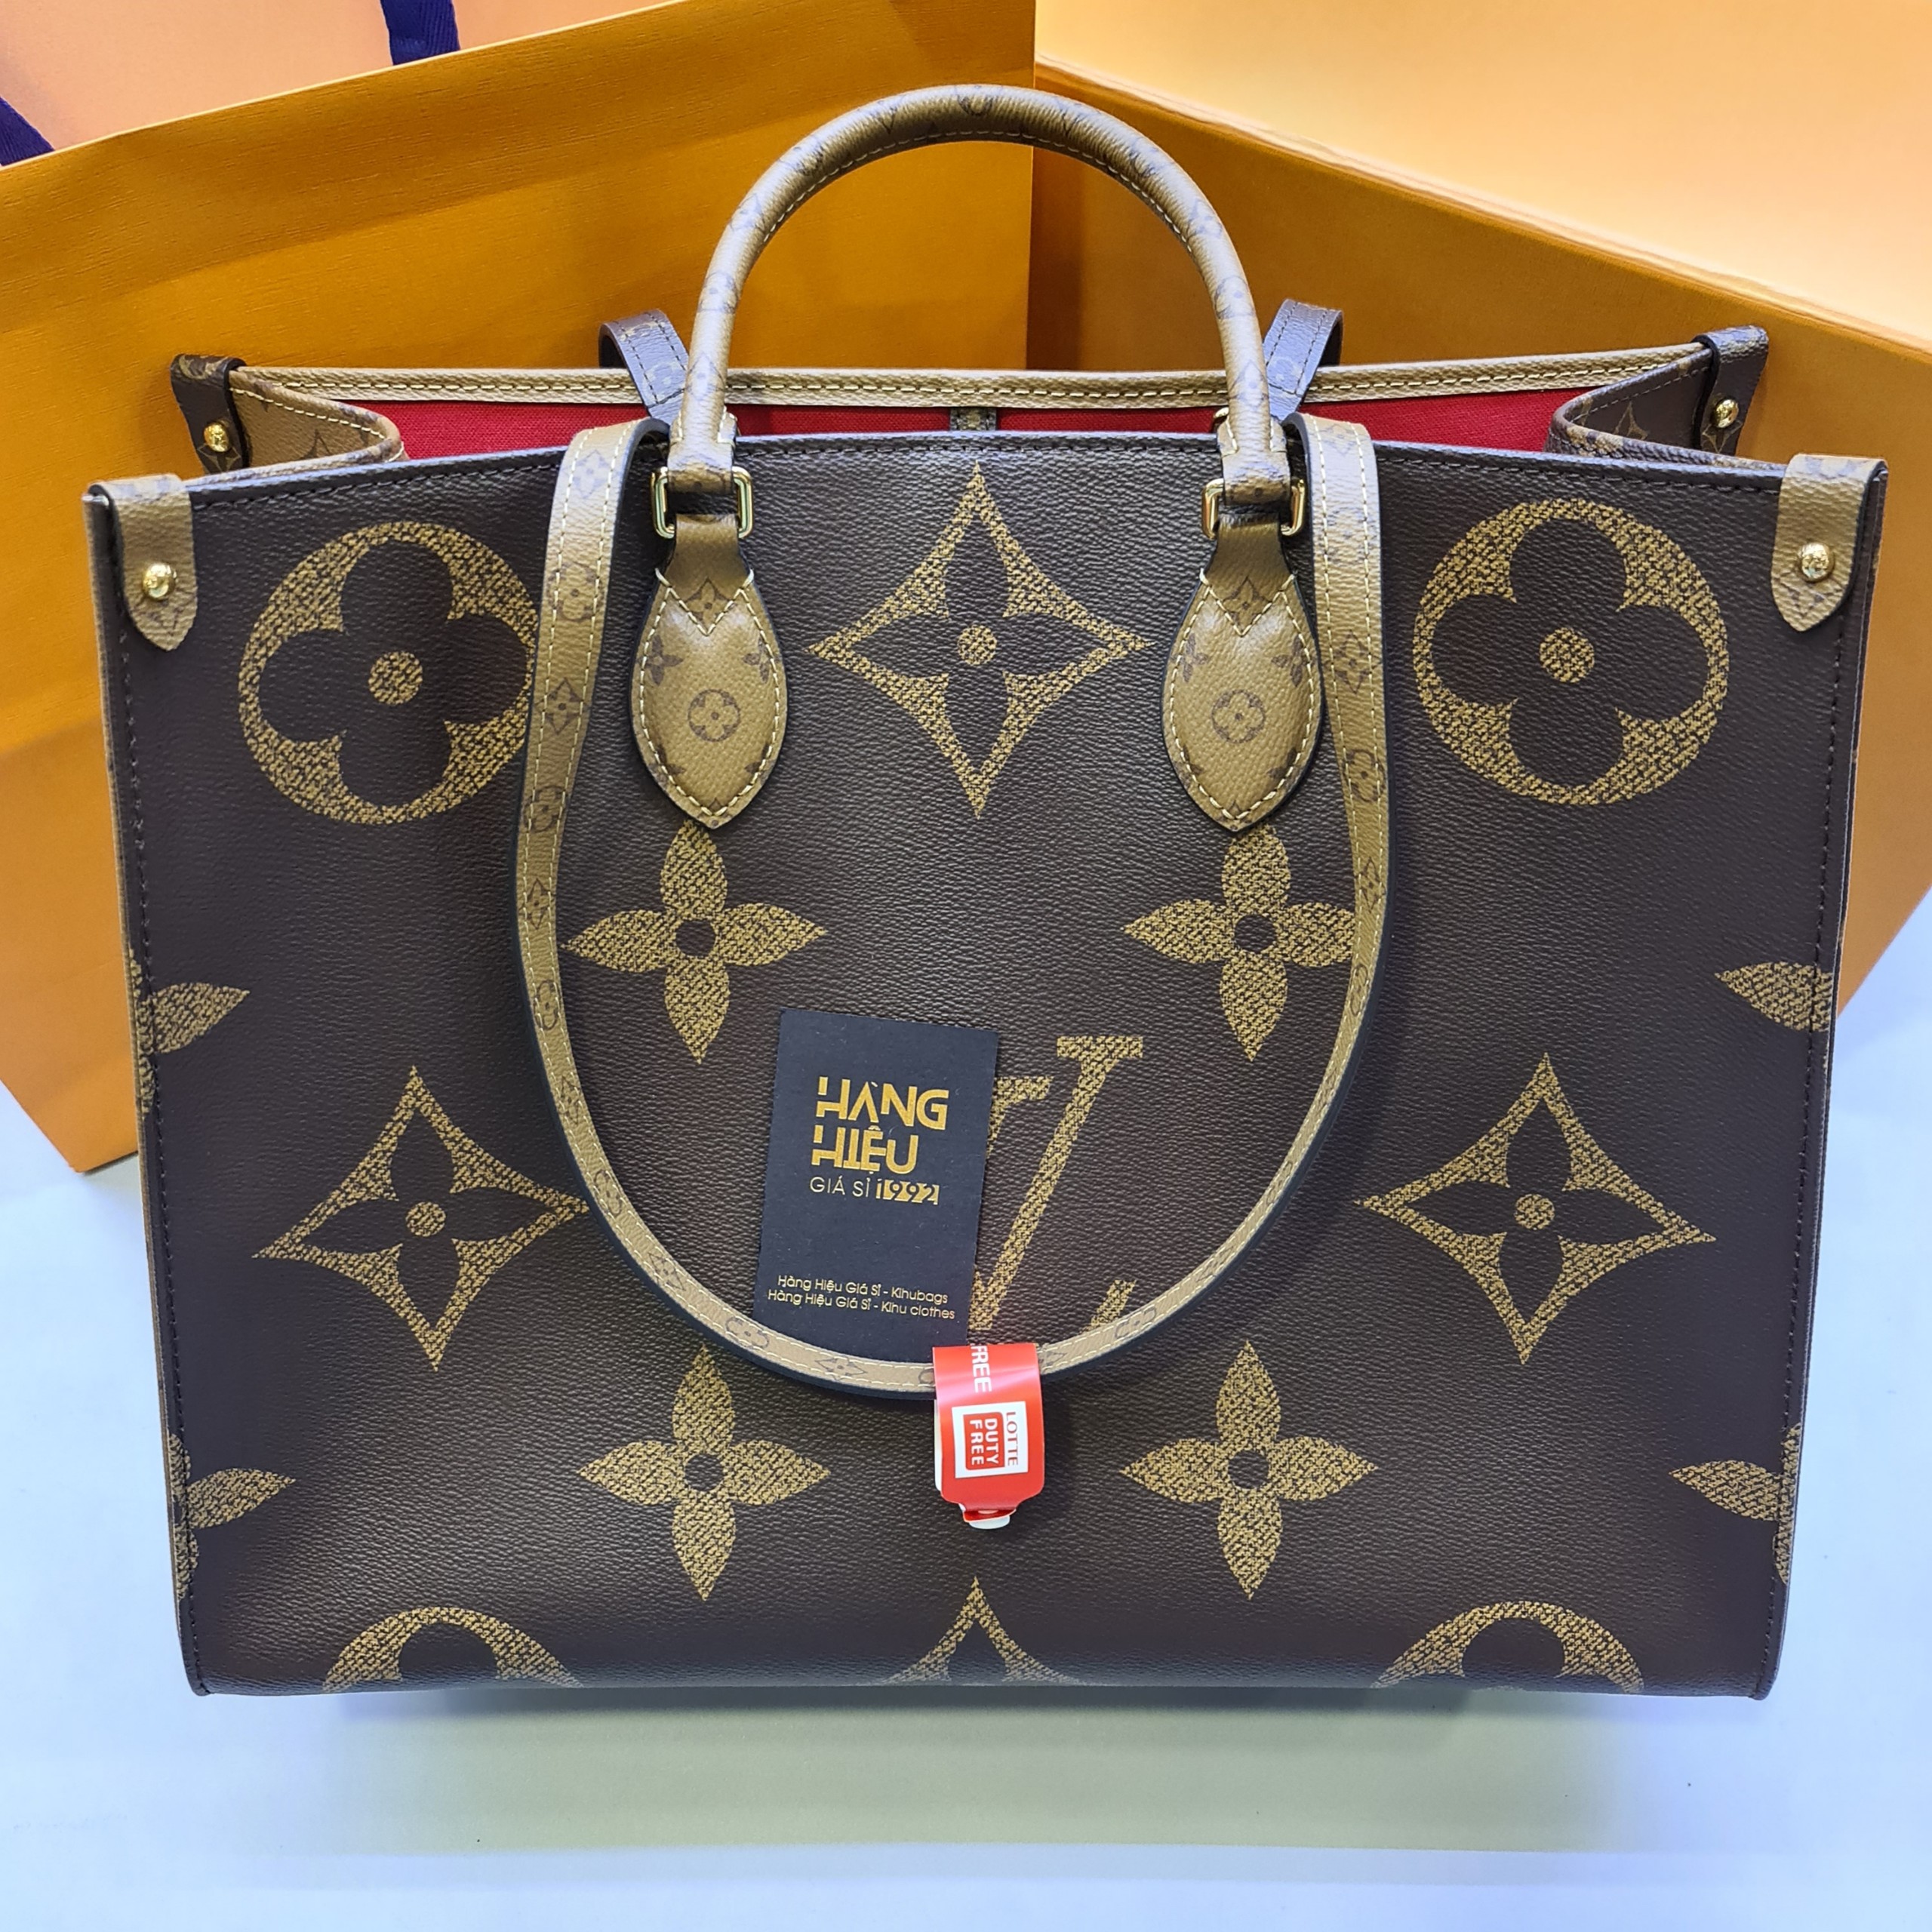 Louis Vuitton ONTHEGO Tote in Monogram Empreinte Leather Honest Review  I  Make Leather Handbags